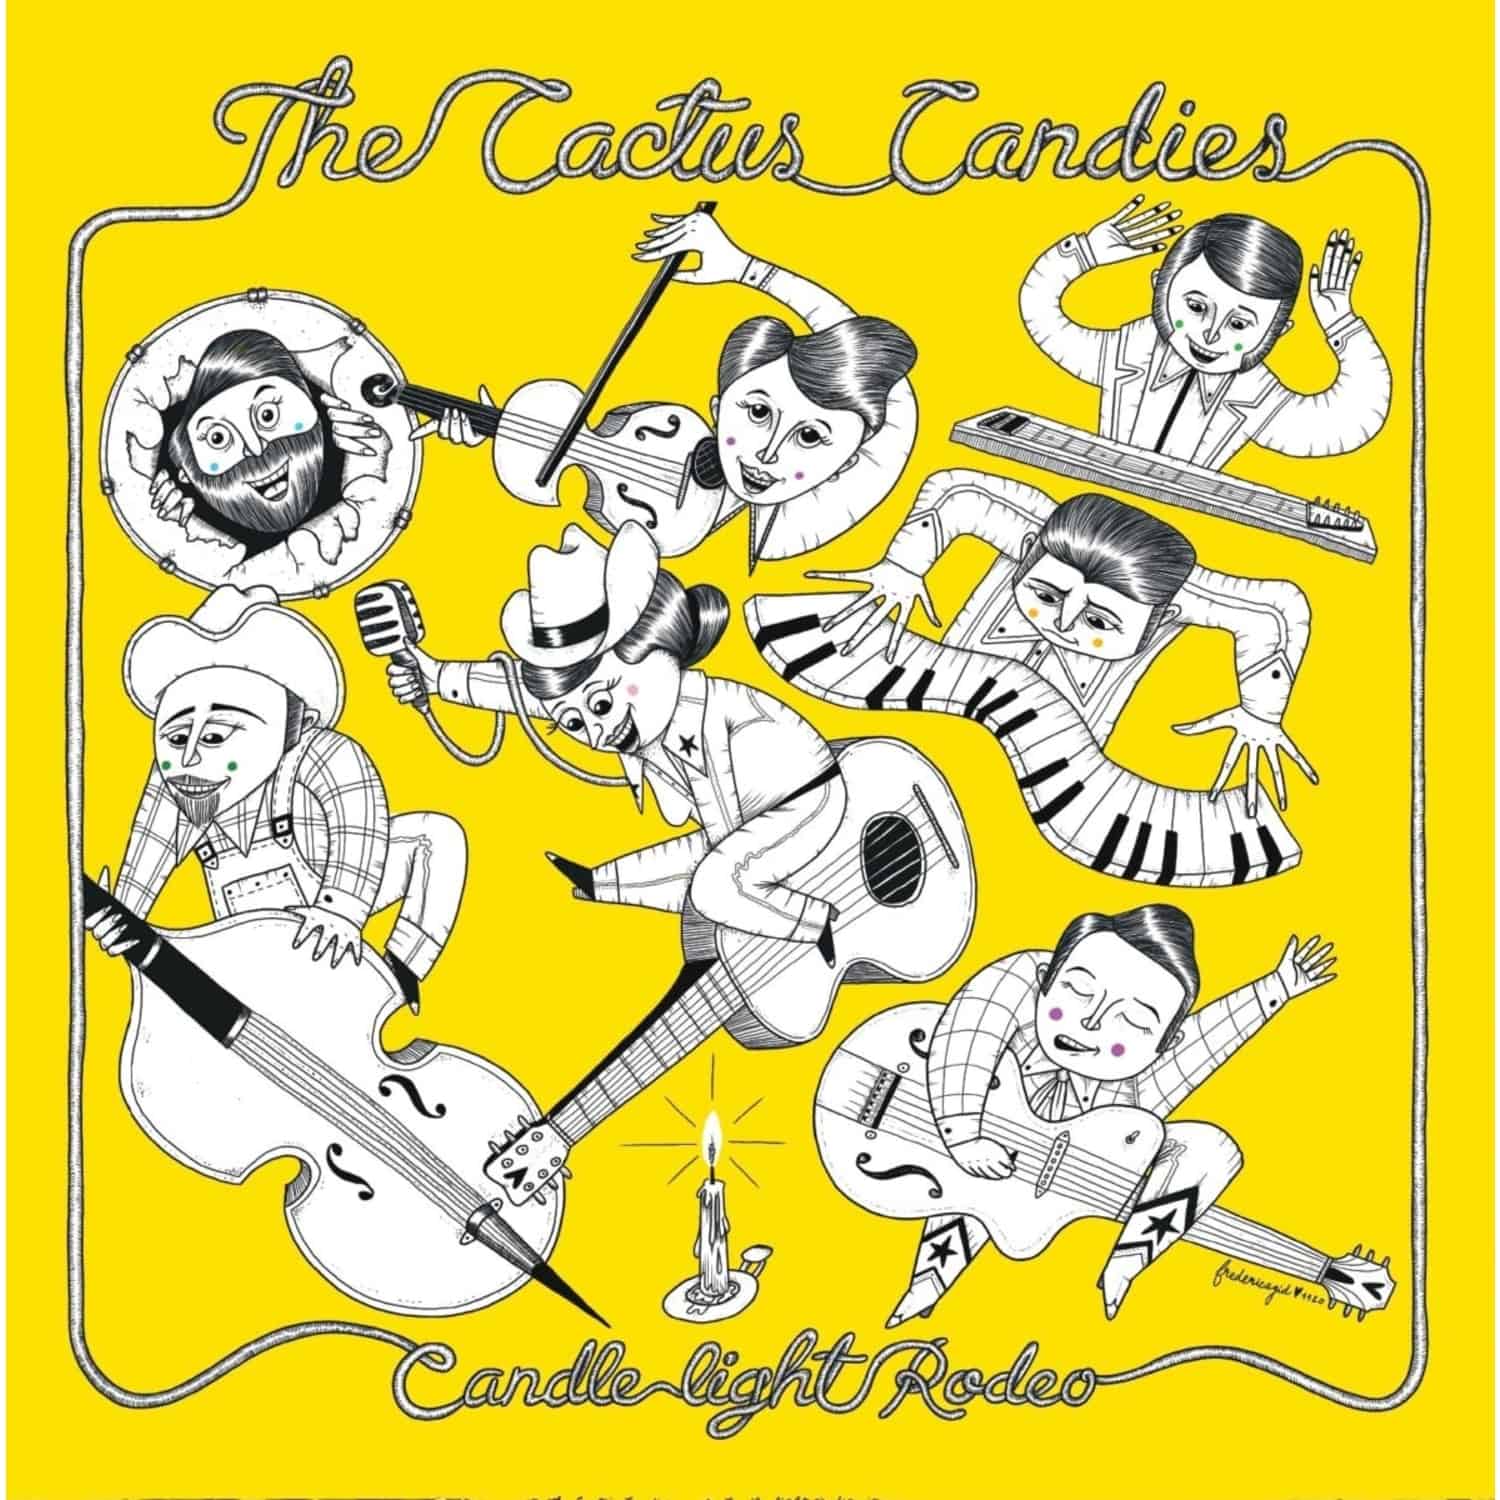  The Cactus Candies - CANDLE LIGHT RODEO 